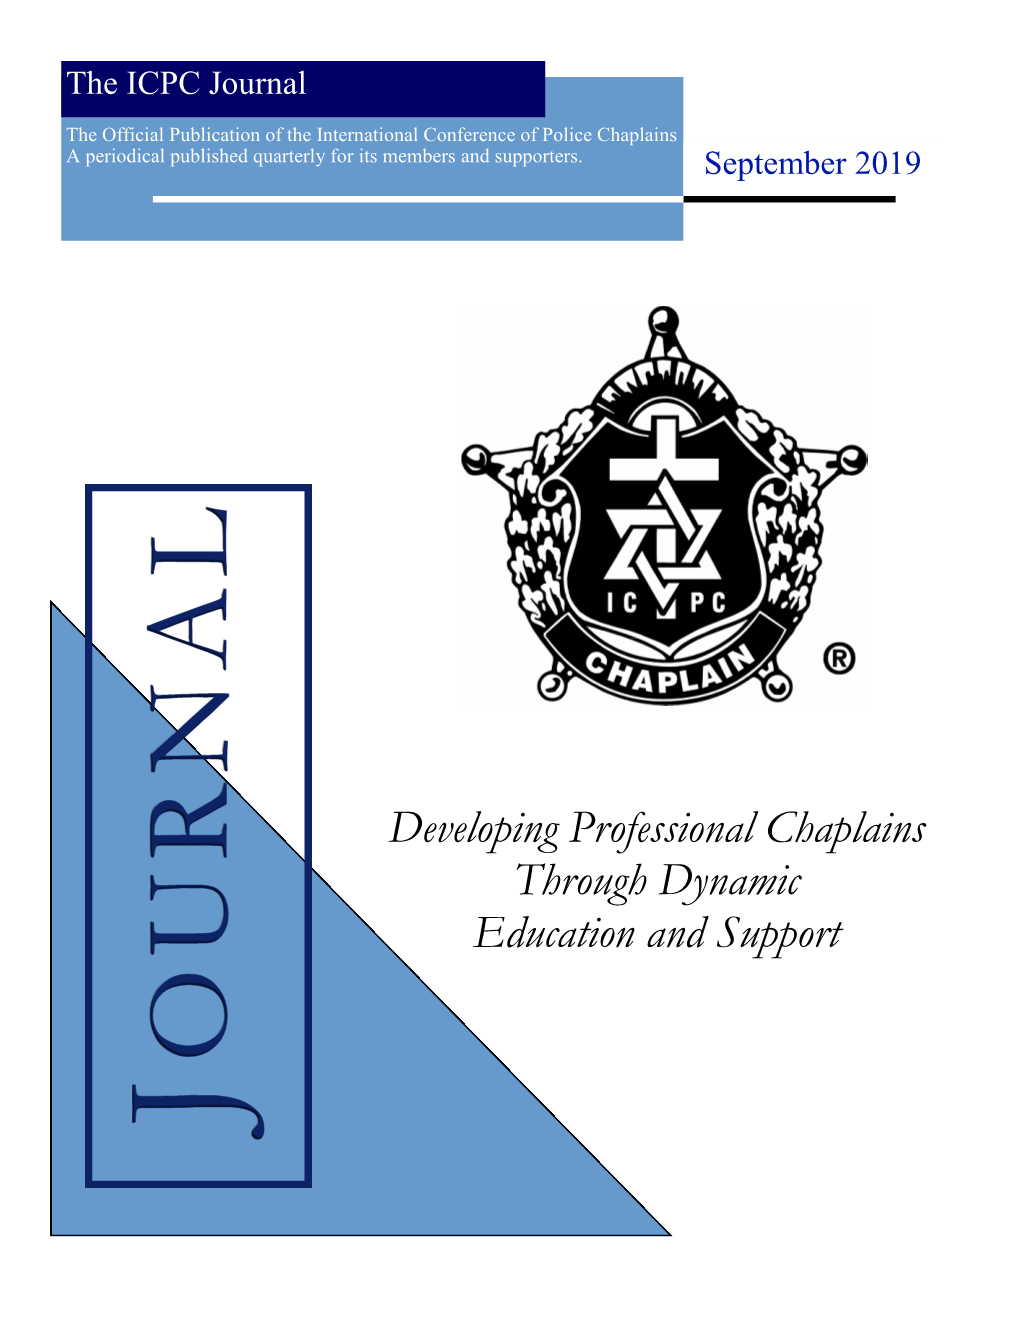 Developing Professional Chaplains Through Dynamic Education and Support